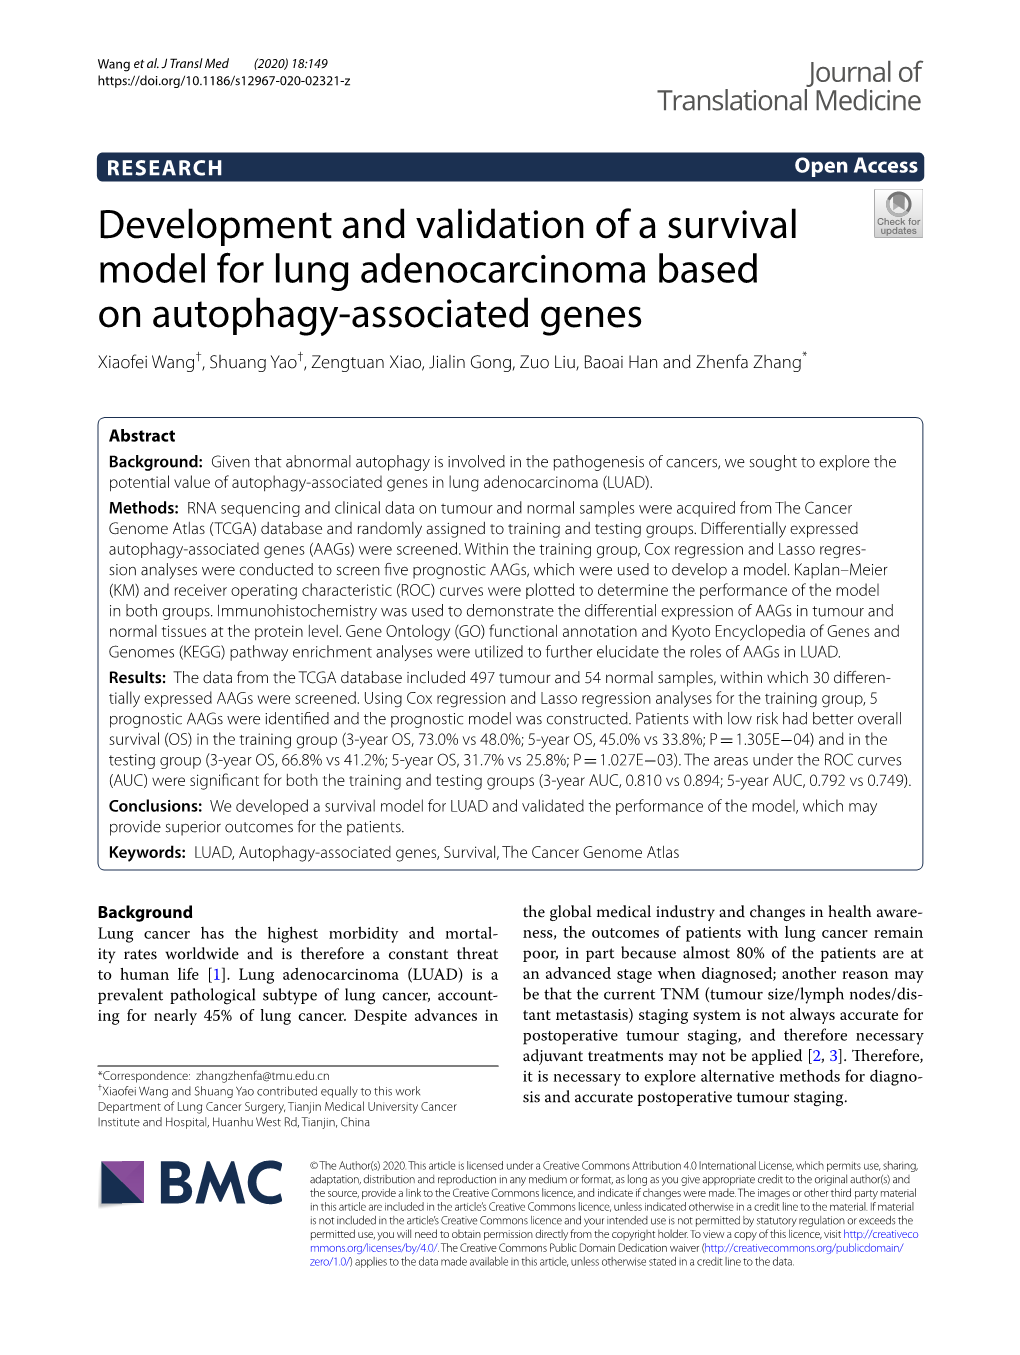 Development and Validation of a Survival Model for Lung Adenocarcinoma Based on Autophagy-Associated Genes